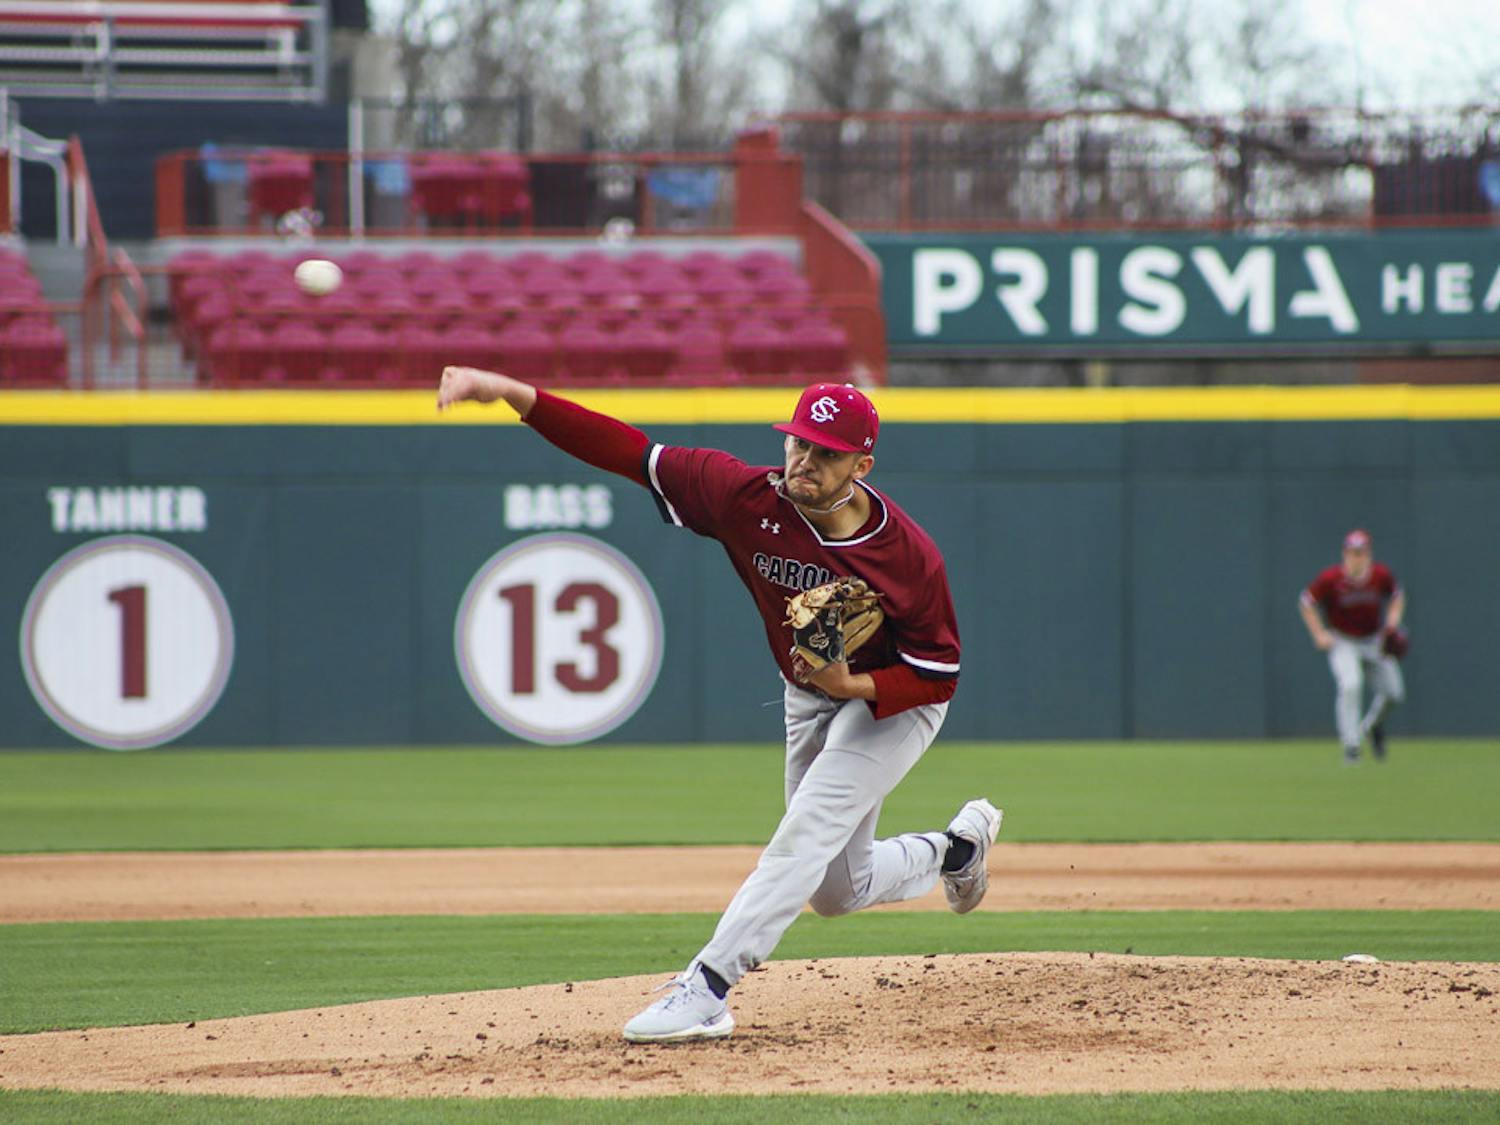 Senior pitcher Noah Hall pitches for team Garnet in the first scrimmage of the season on Jan. 23, 2023. Hall is returning to play for South Carolina after making the 20th-round pick by the Milwaukee Brewers in July 2022.